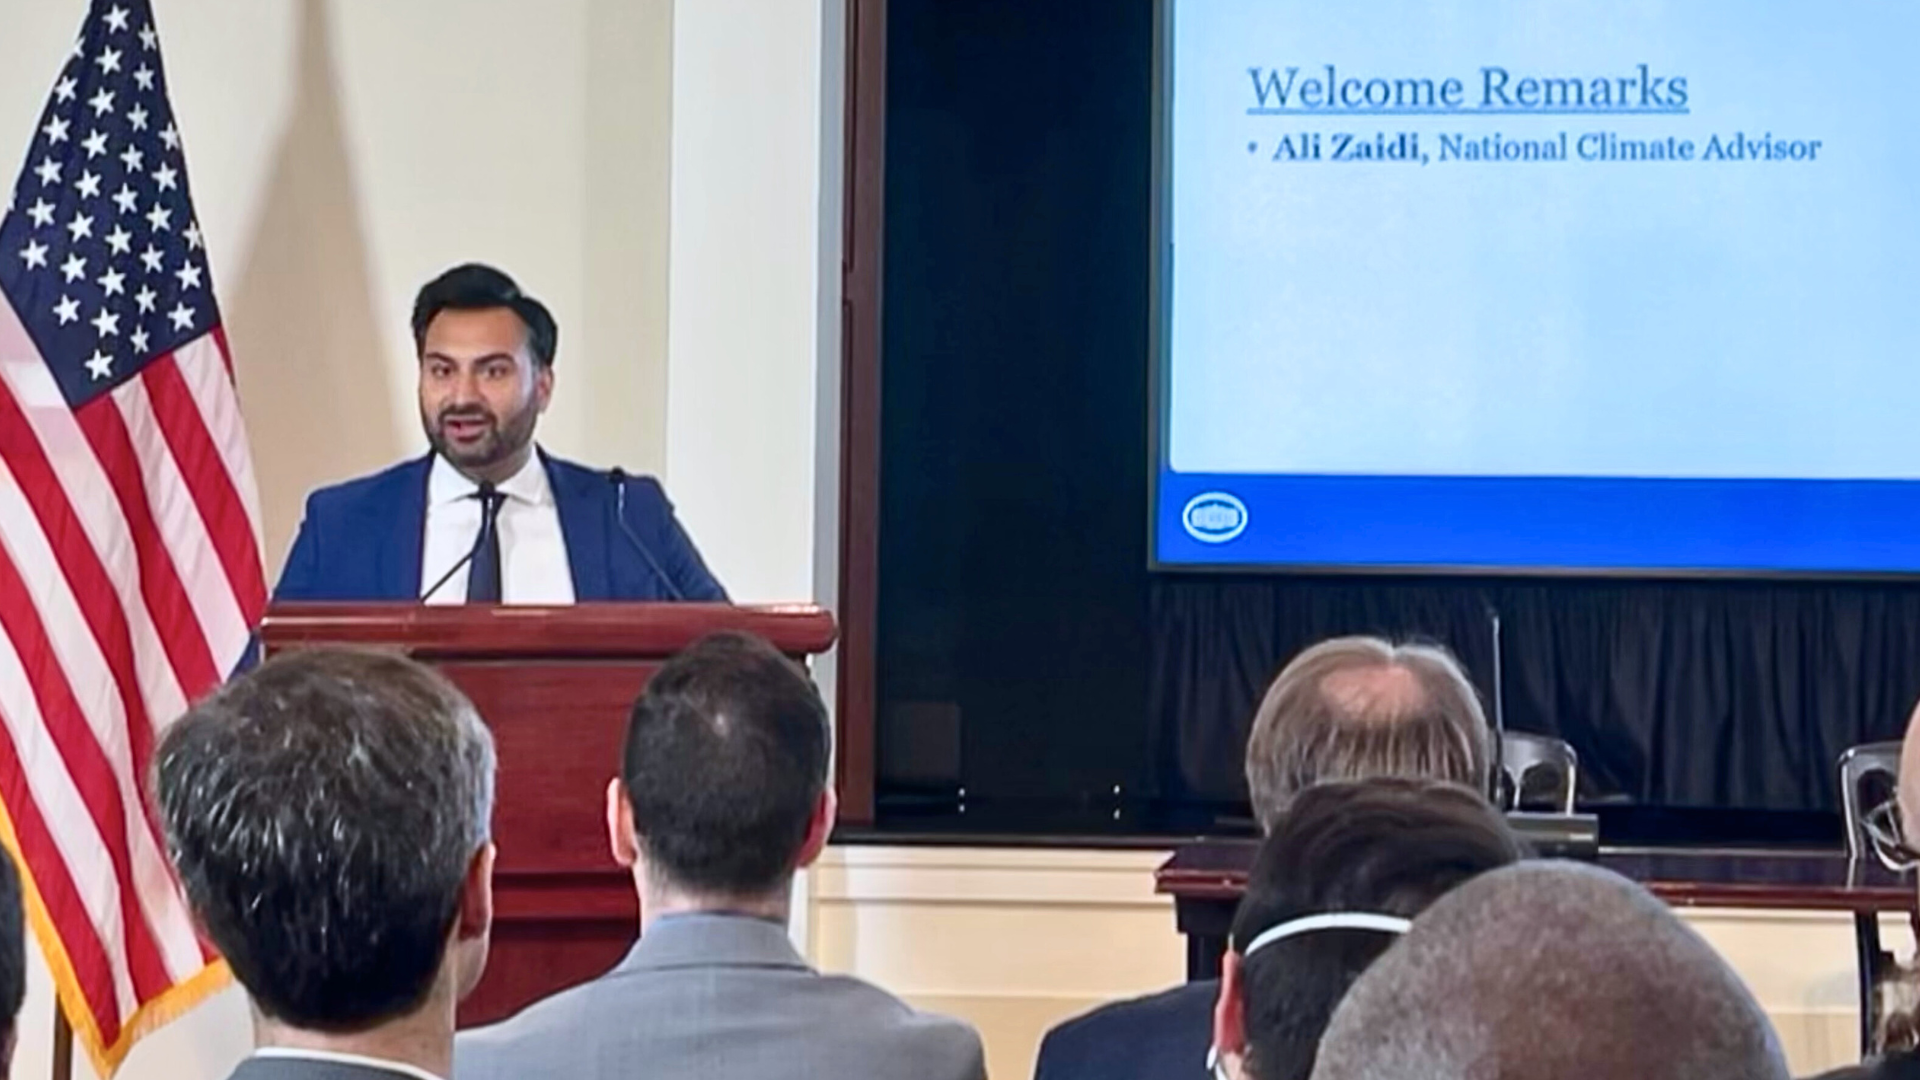 National Climate Advisor Ali Zaidi delivers remarks at the White House Summit on Modernizing the Power Grid.